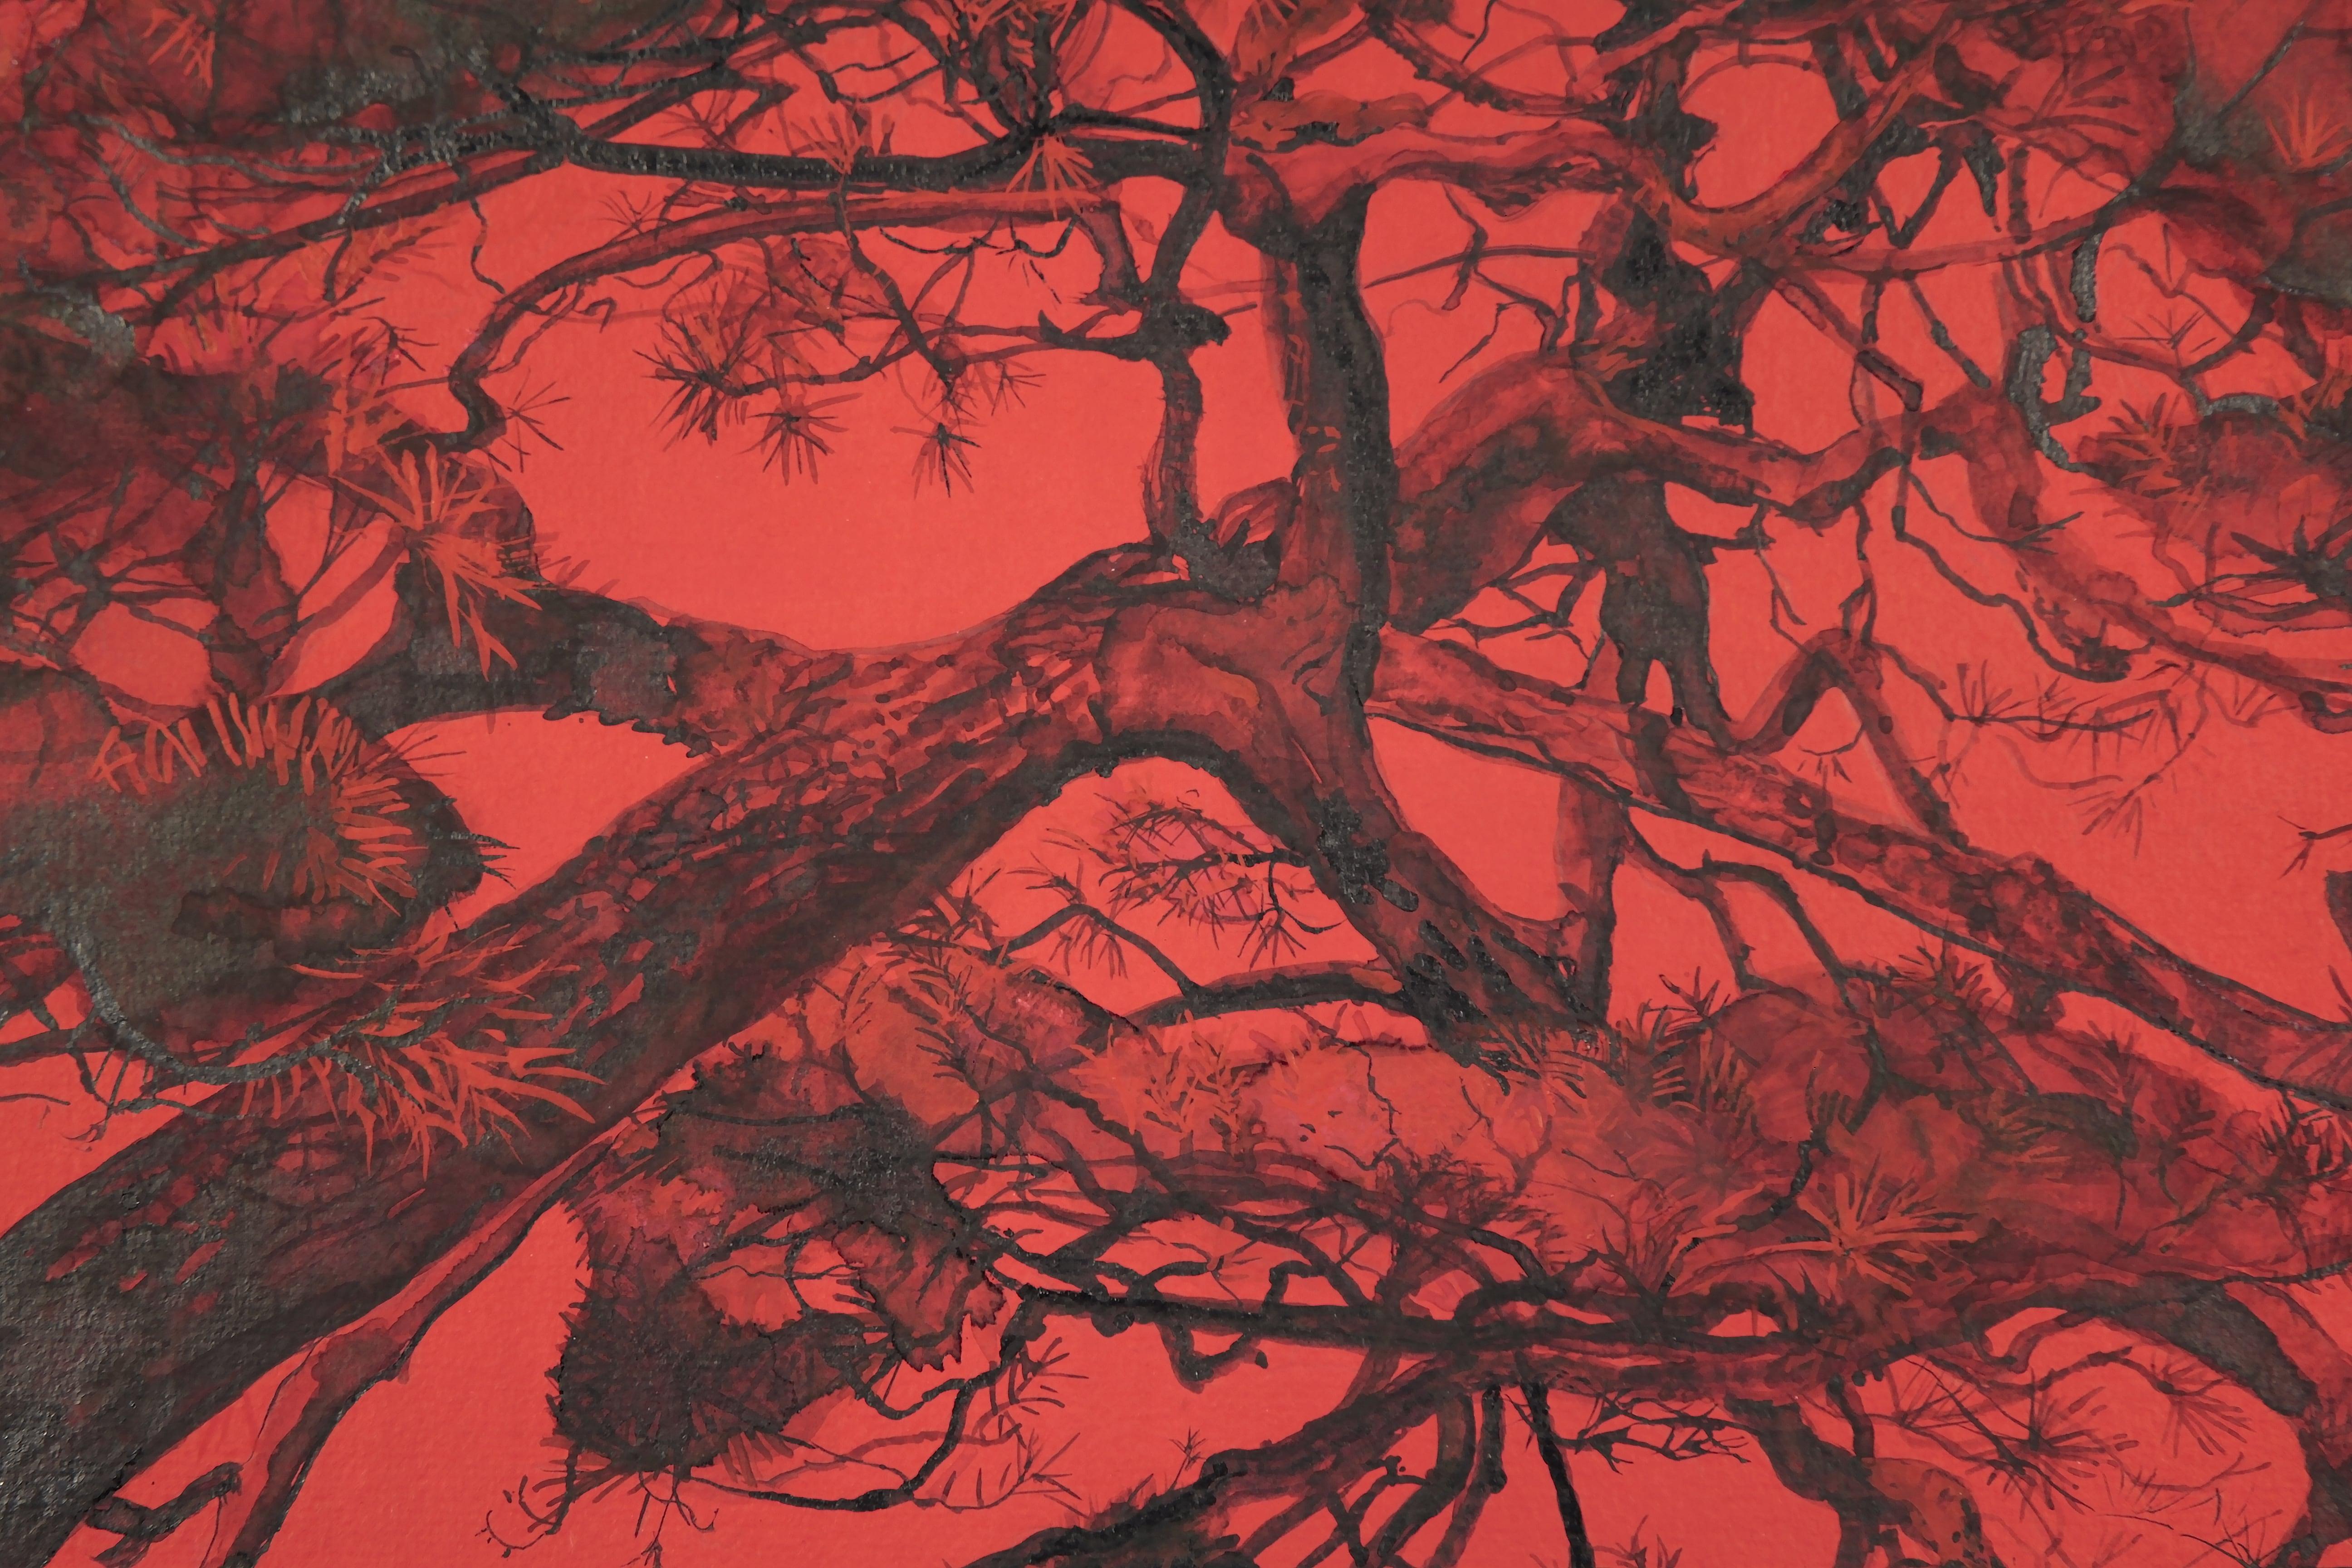 Tilted Pine II by L. Mizutani - Japanese-style painting, red triptych, landscape - Painting by Lumi Mizutani